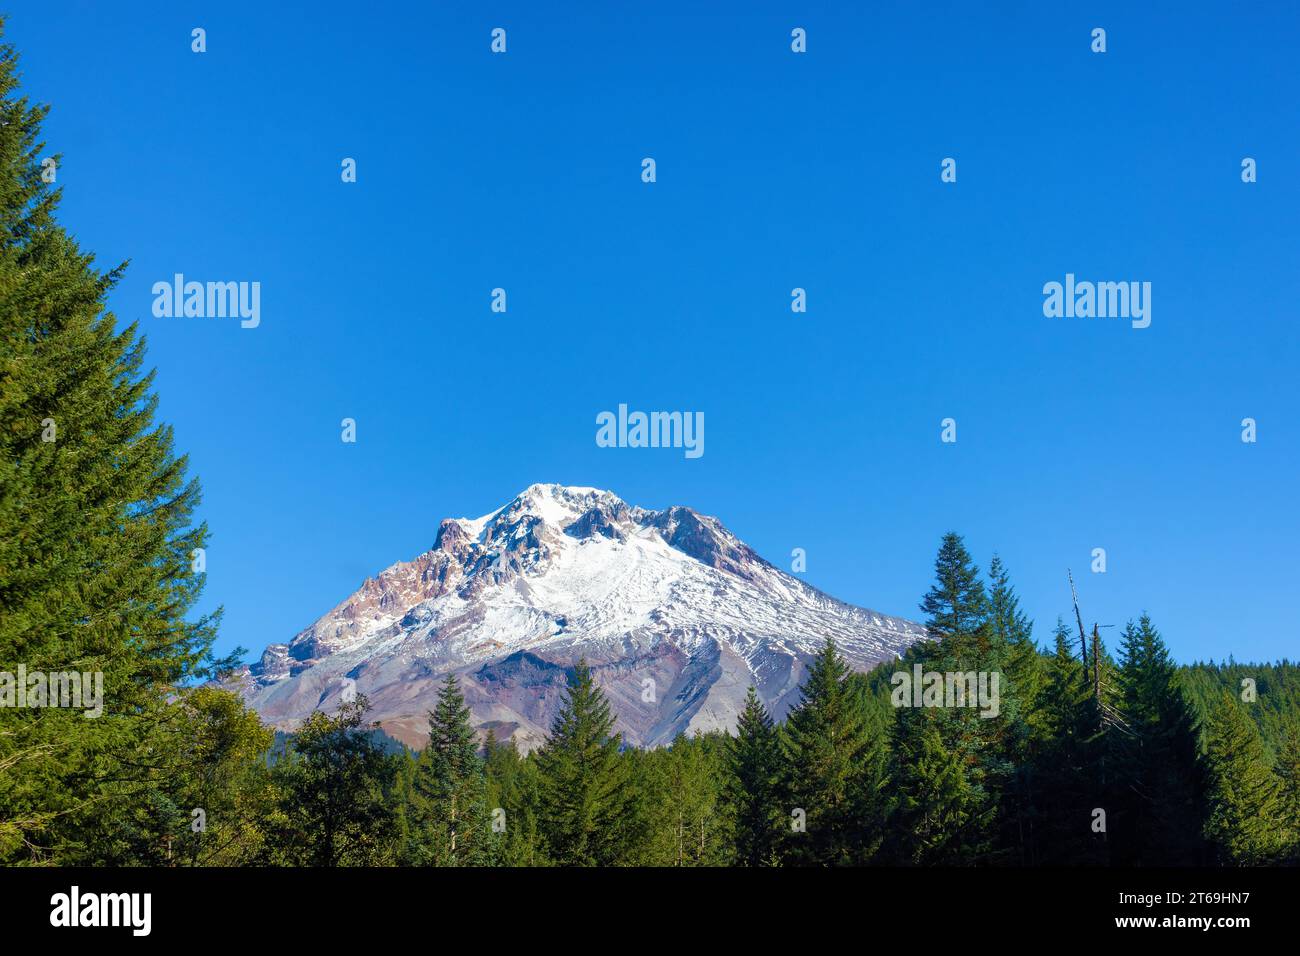 Elevation 11,249 makes Mt Hood the highest Volcanic Peak in Oregon one of many in the Cascade Mountain Range. Stock Photo